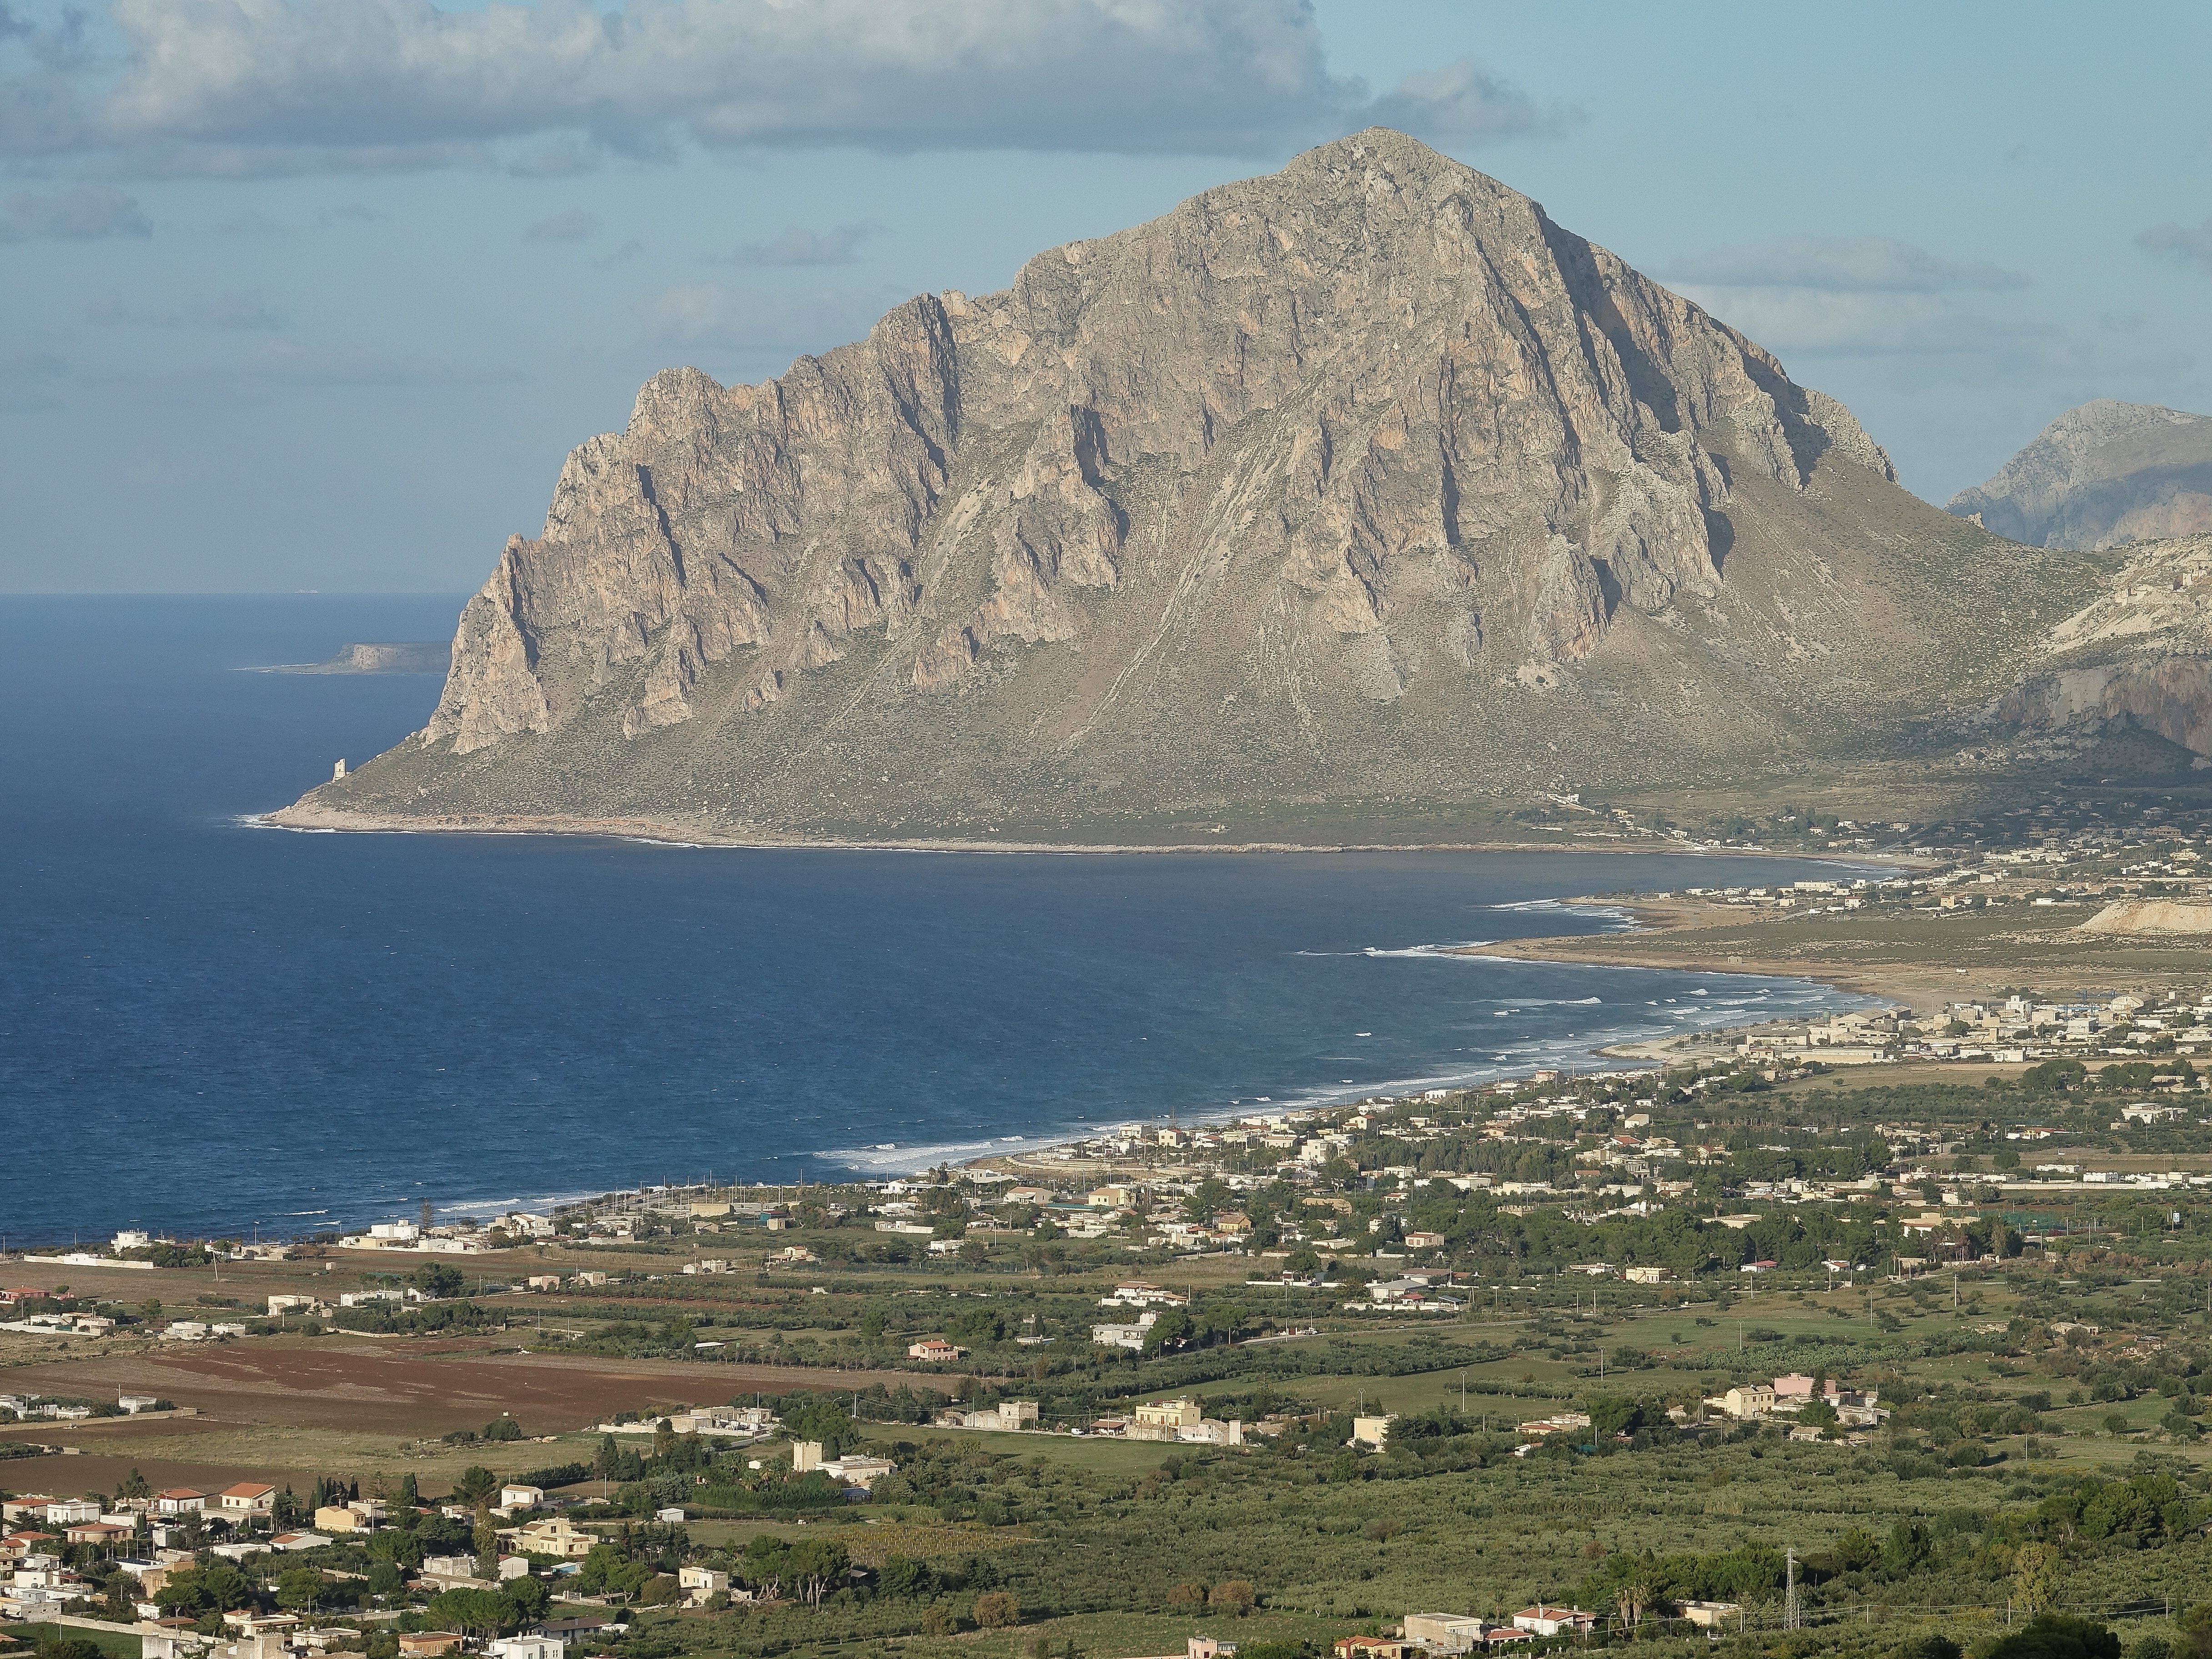 View of the sea shore and surrounding settlements from Erice